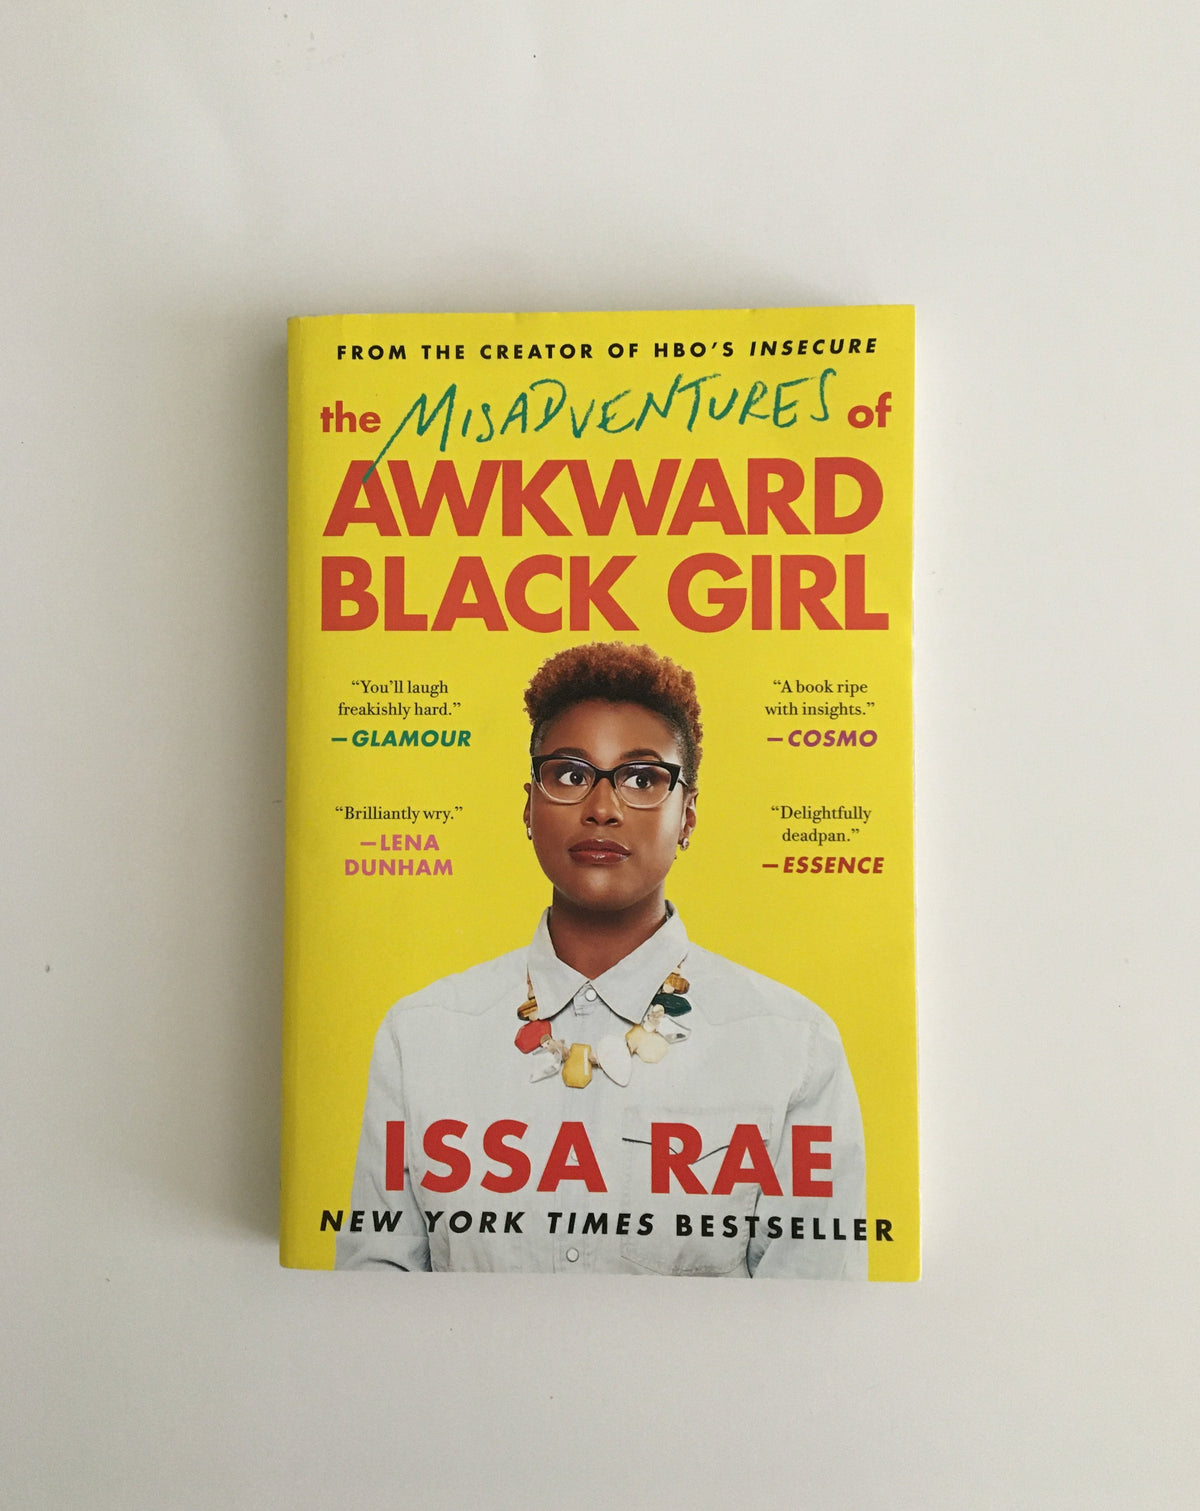 The Misadventures of Awkward Black Girl by Issa Rae